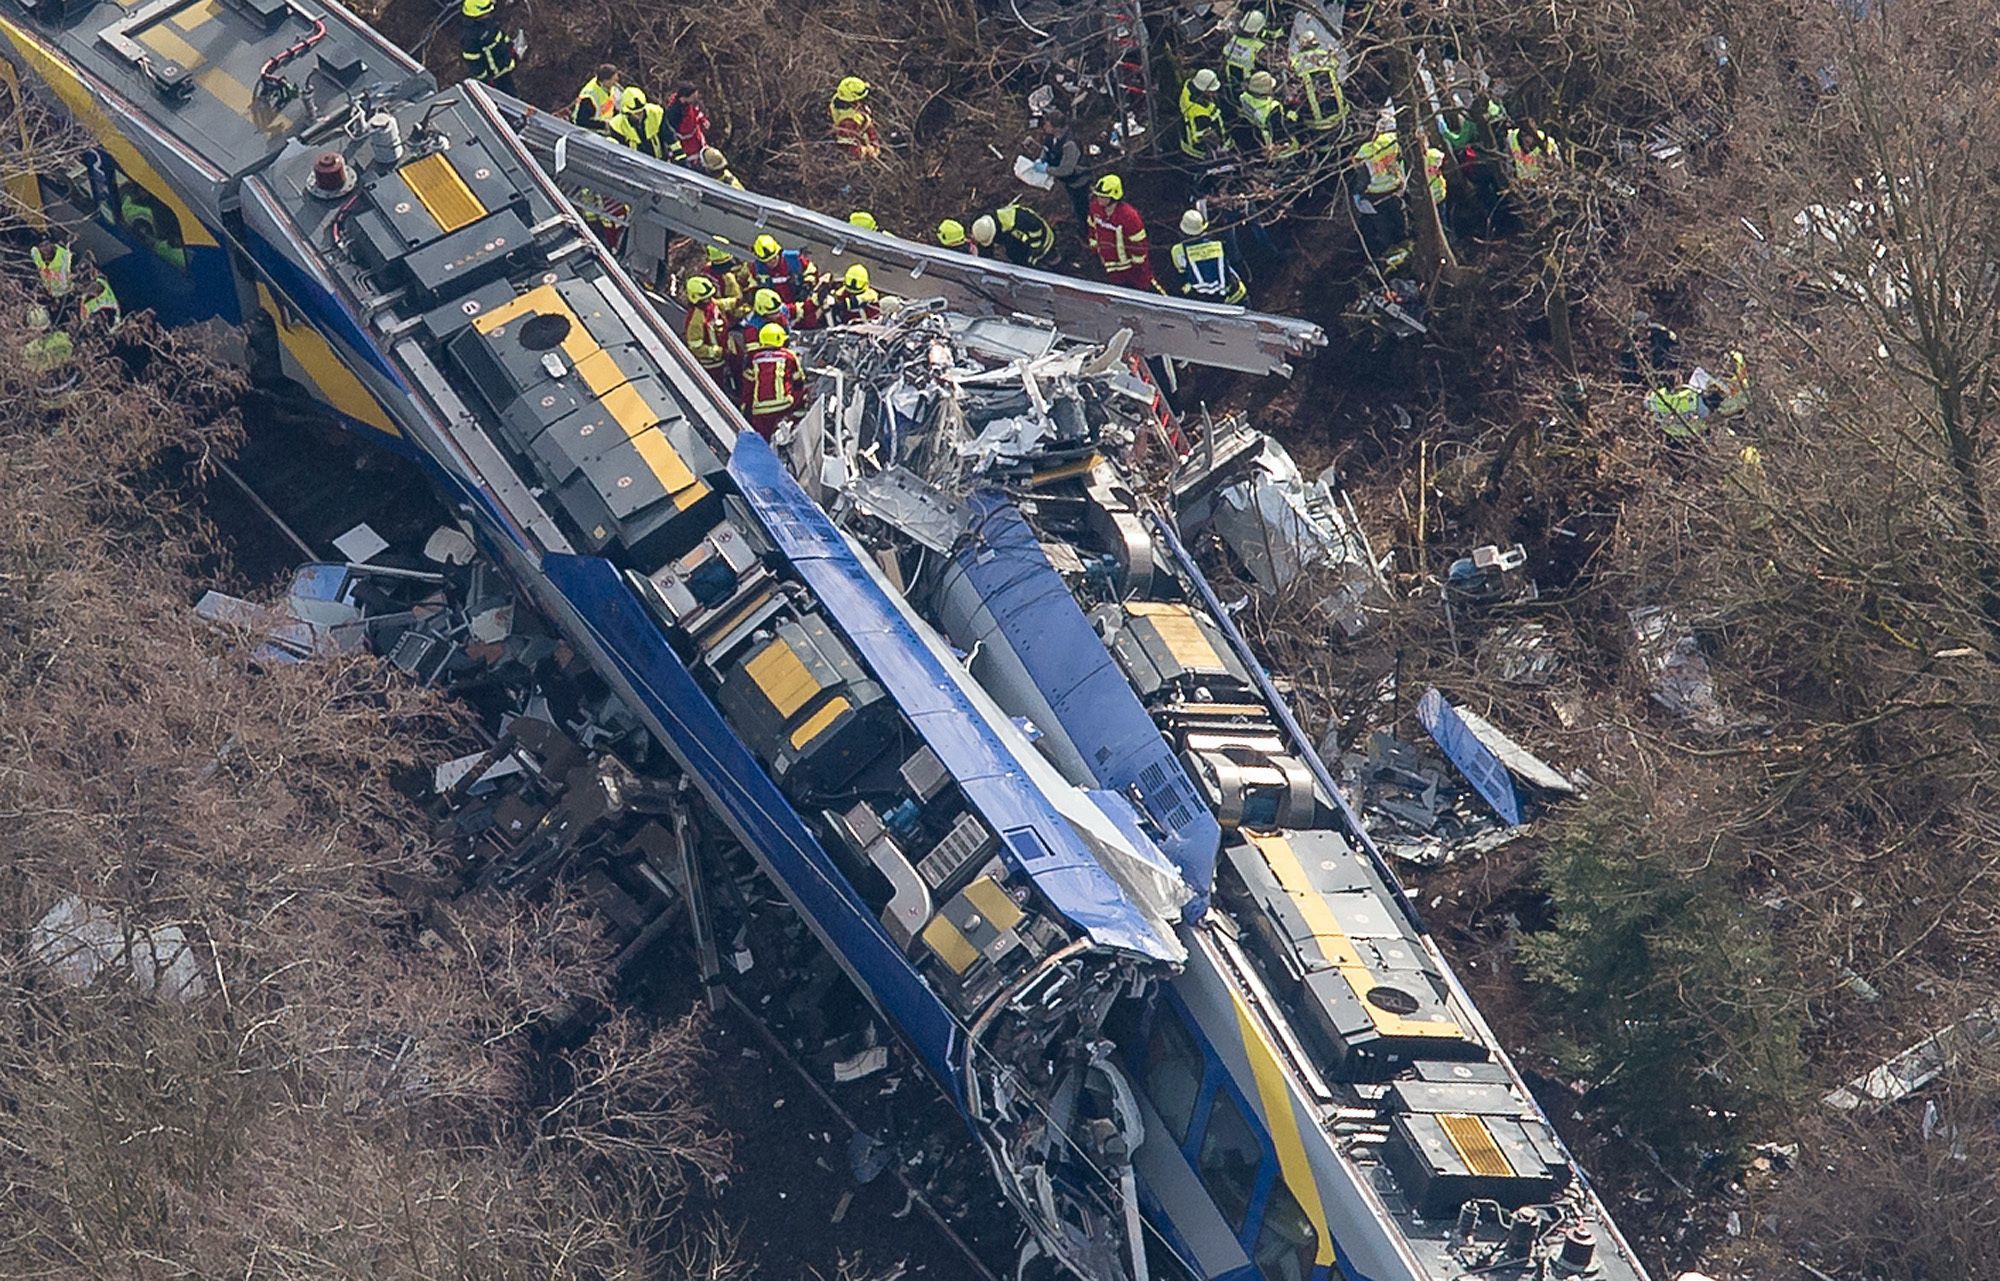 An aerial view of rescue forces working at the site of a train accident near Bad Aibling, Germany on Tuesday.